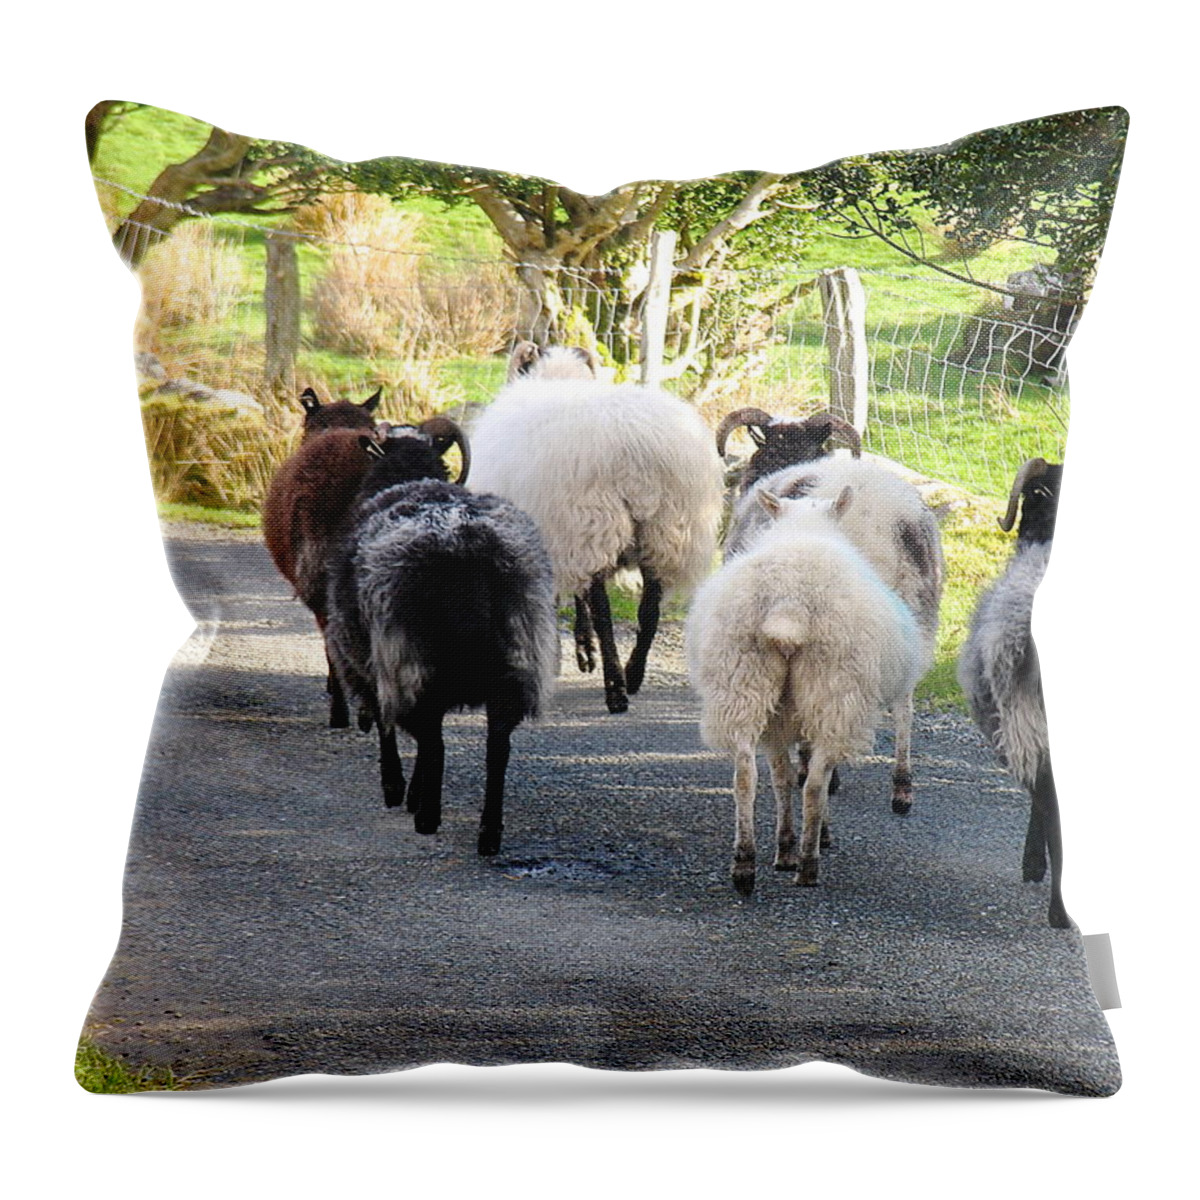 Irish Sheep Throw Pillow featuring the photograph Ba Ba Blacksheep by Suzanne Oesterling